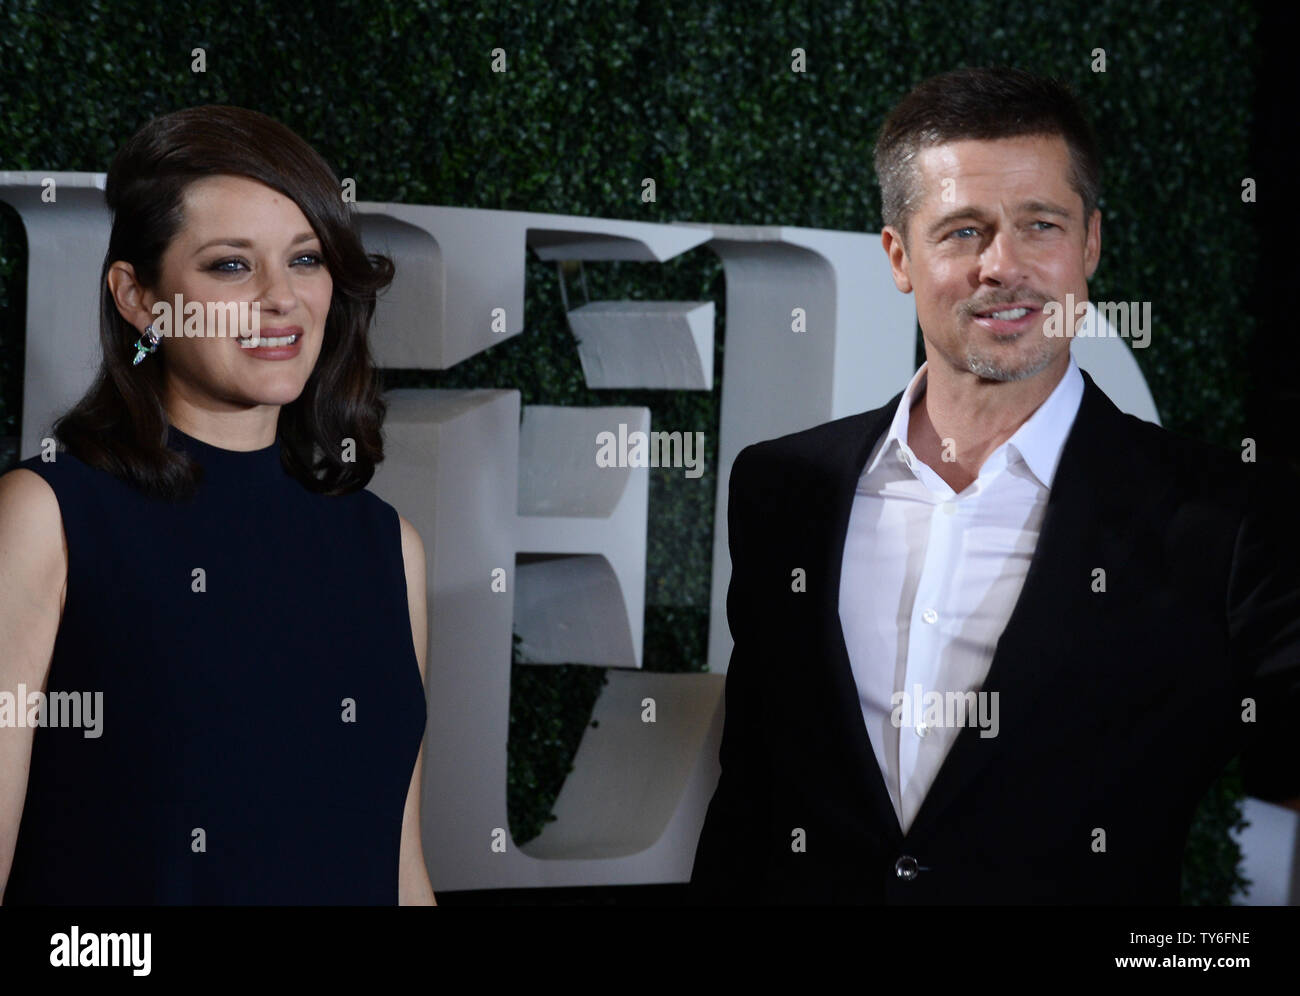 Cast members Marion Cotillard and Brad Pitt attend the premiere of the  motion picture romantic war thriller "Allied" at the Regency Village  Theatre in the Westwood section of Los Angeles on November